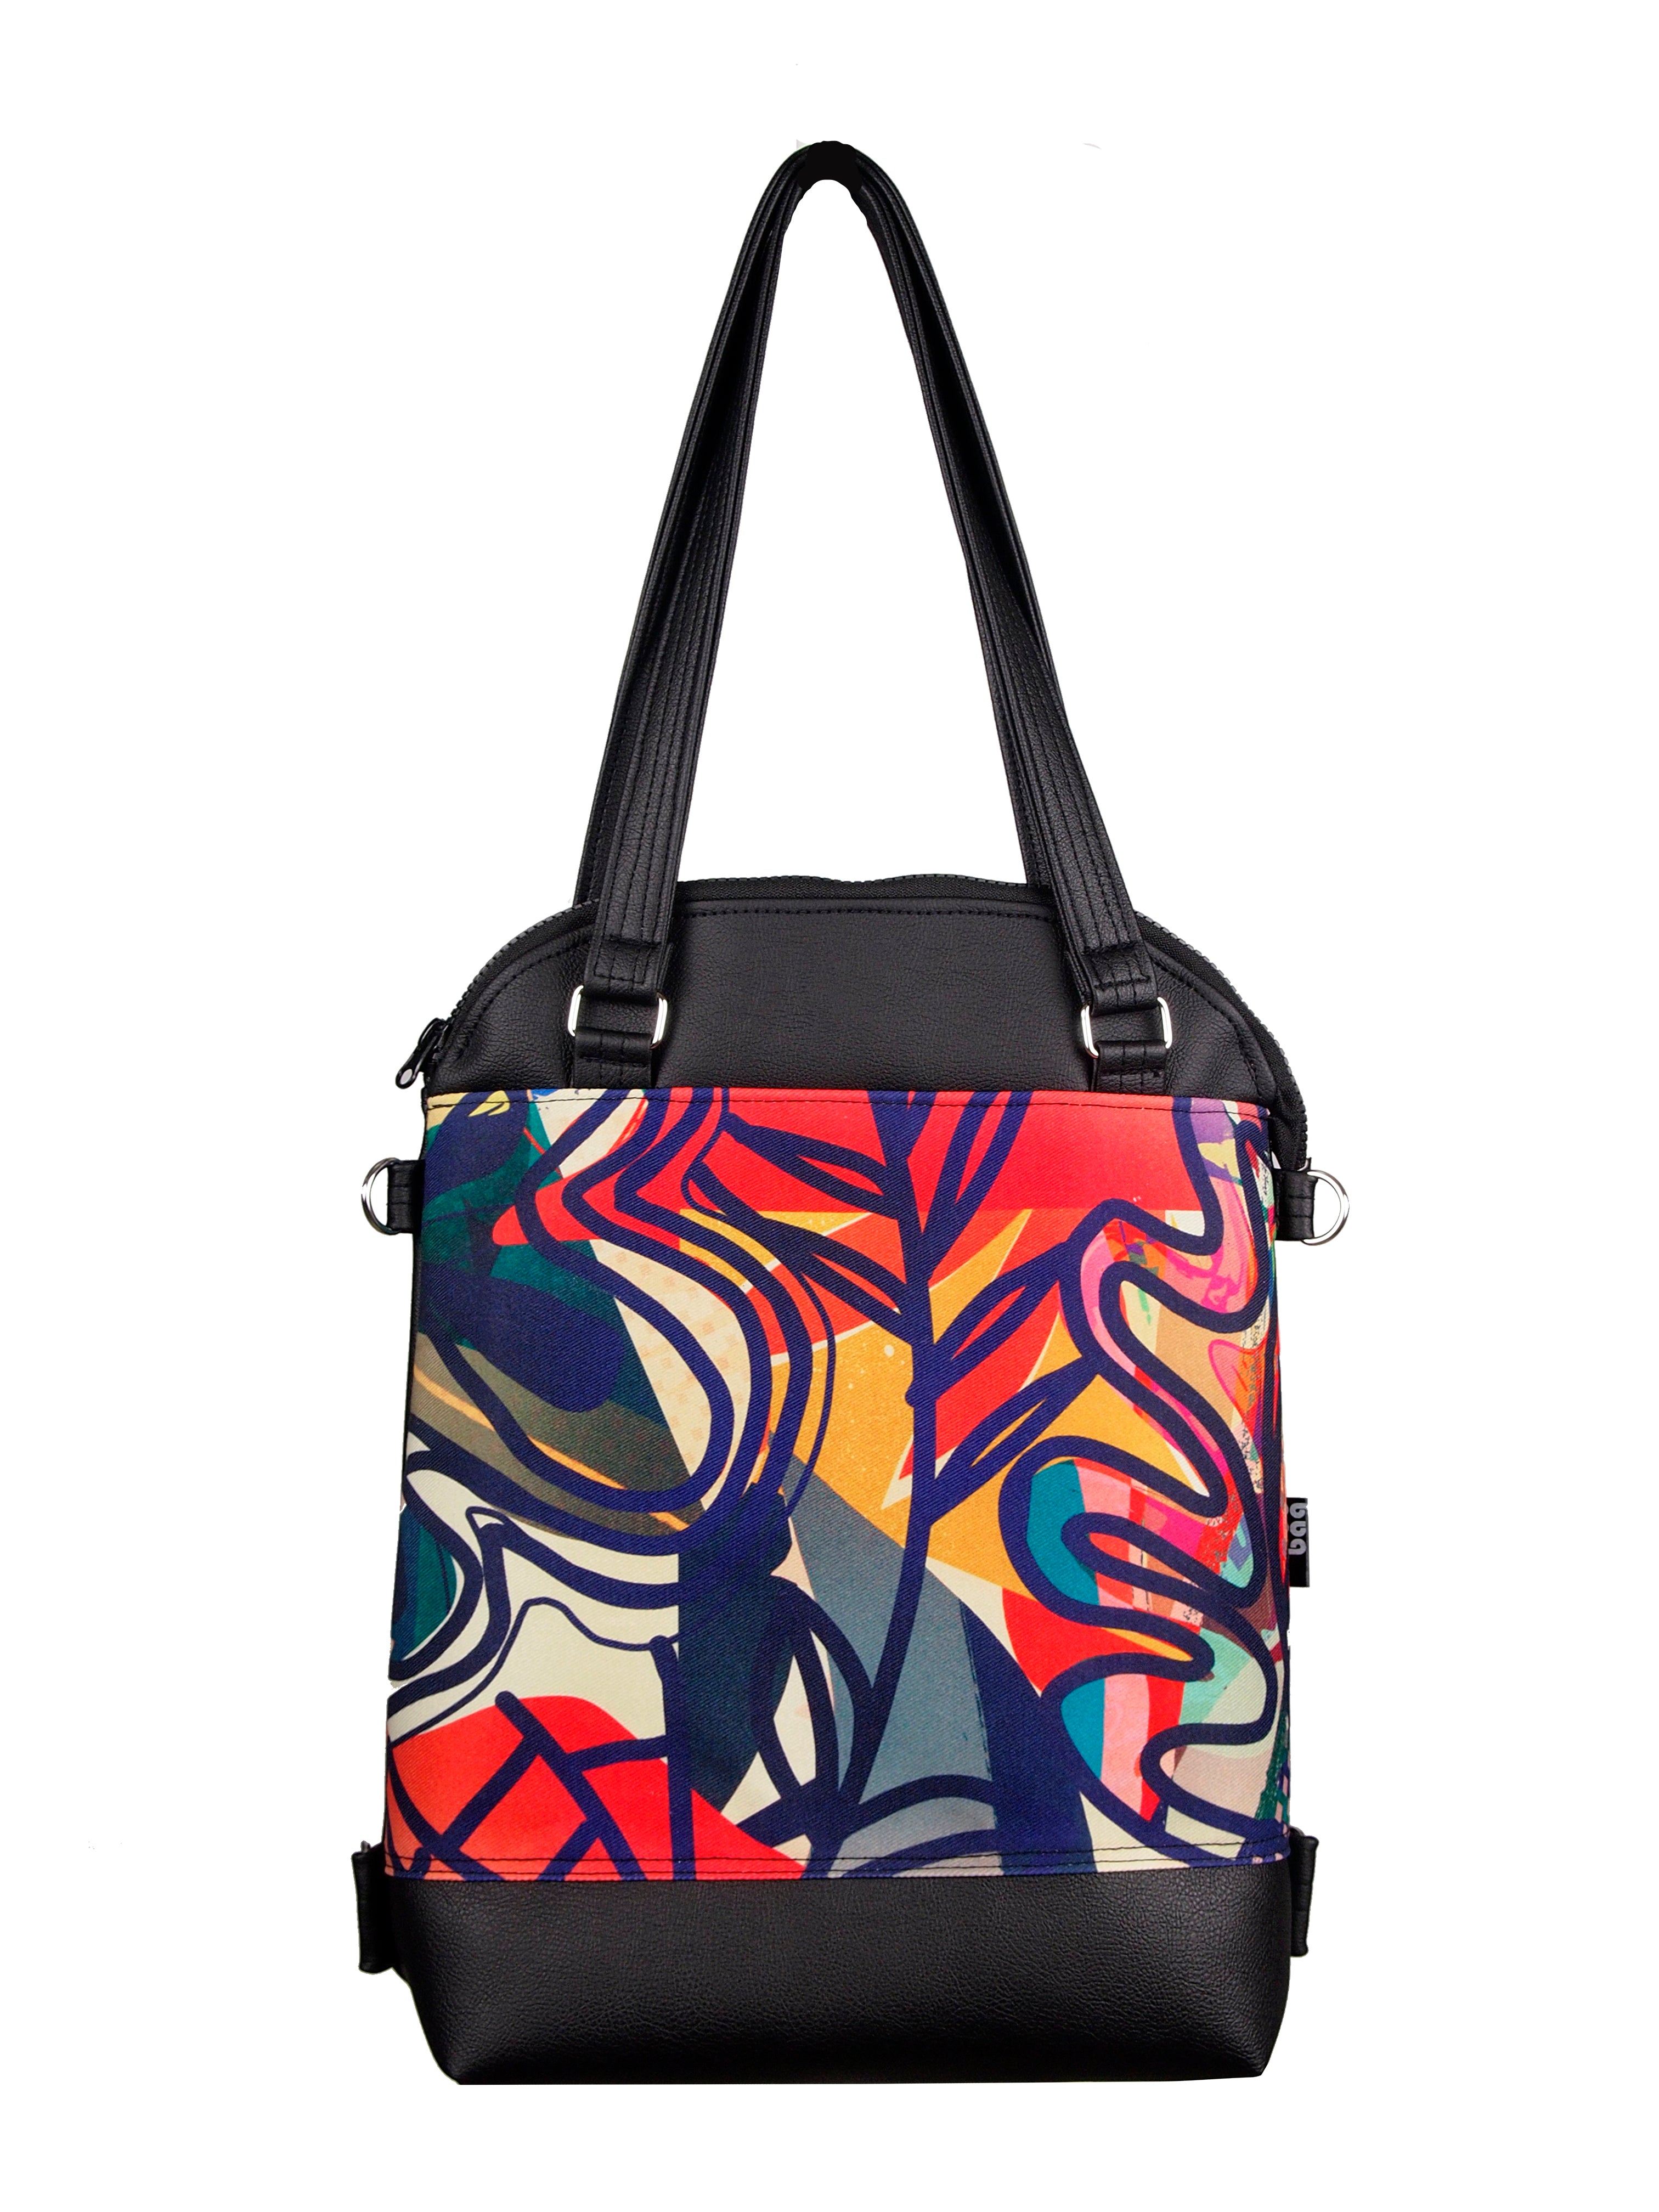 Bardo classic bag and backpack - Summer abstraction - Premium  from BARDO ART WORKS - Just lv89.00! Shop now at BARDO ART WORKS